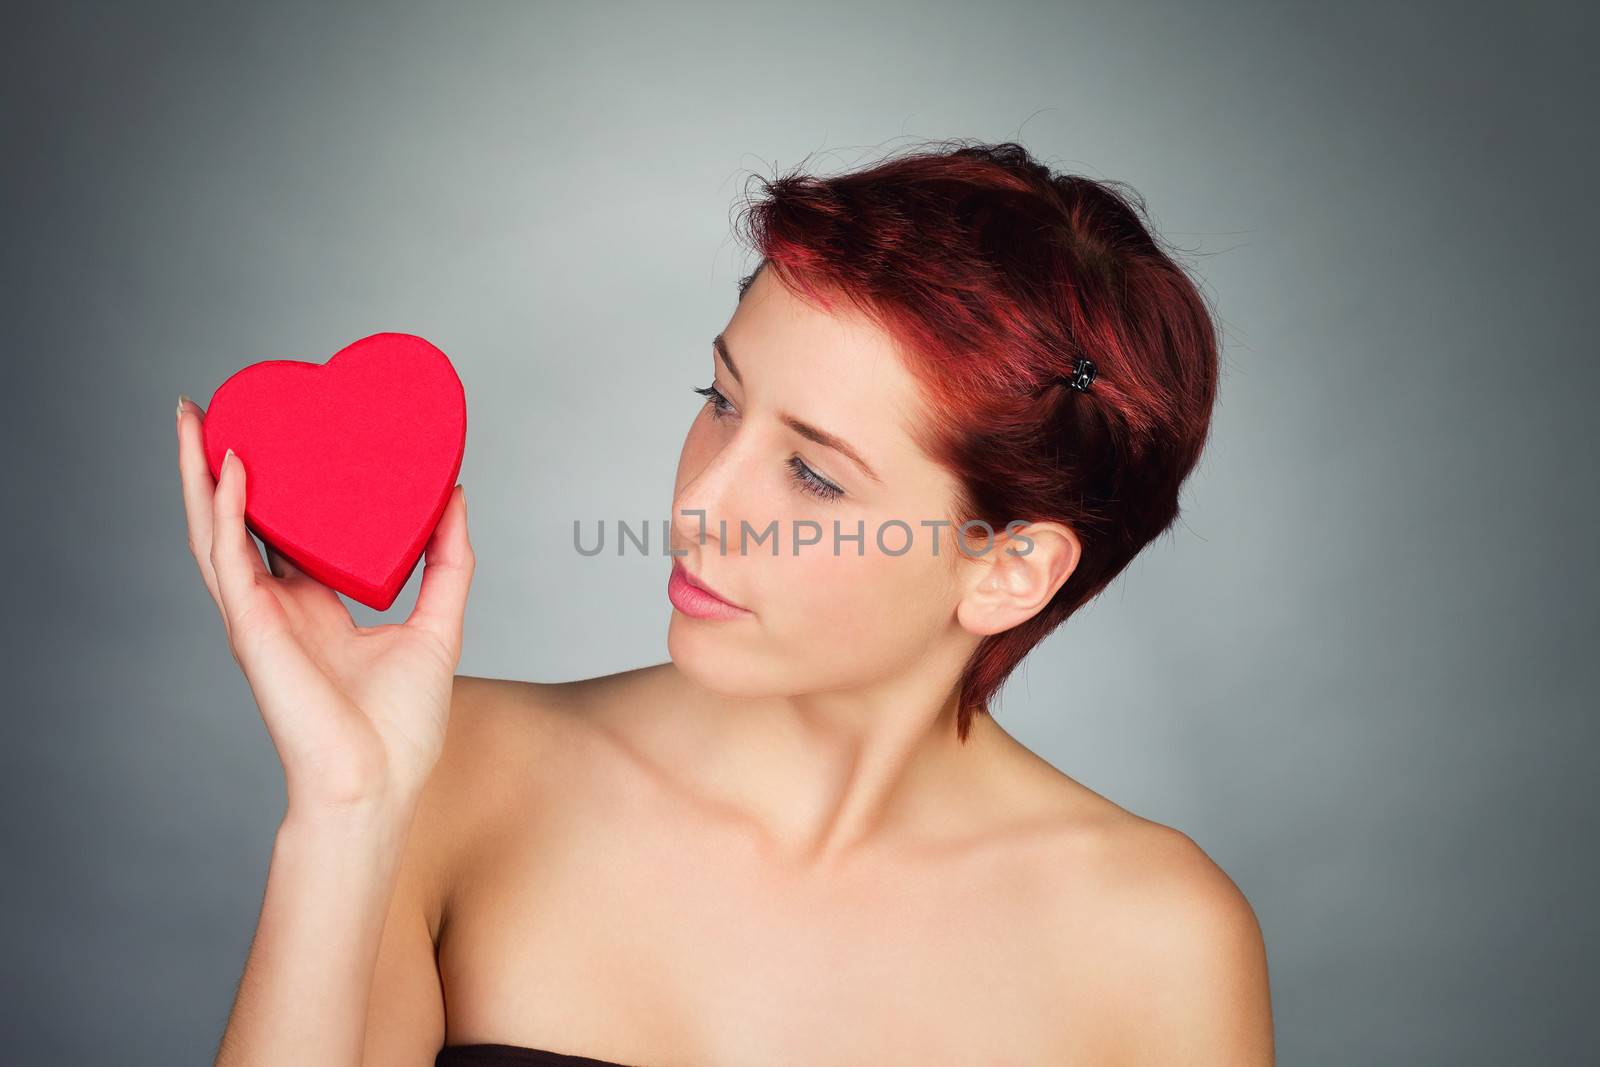 beautiful redhead woman looking at a red heart in her hand